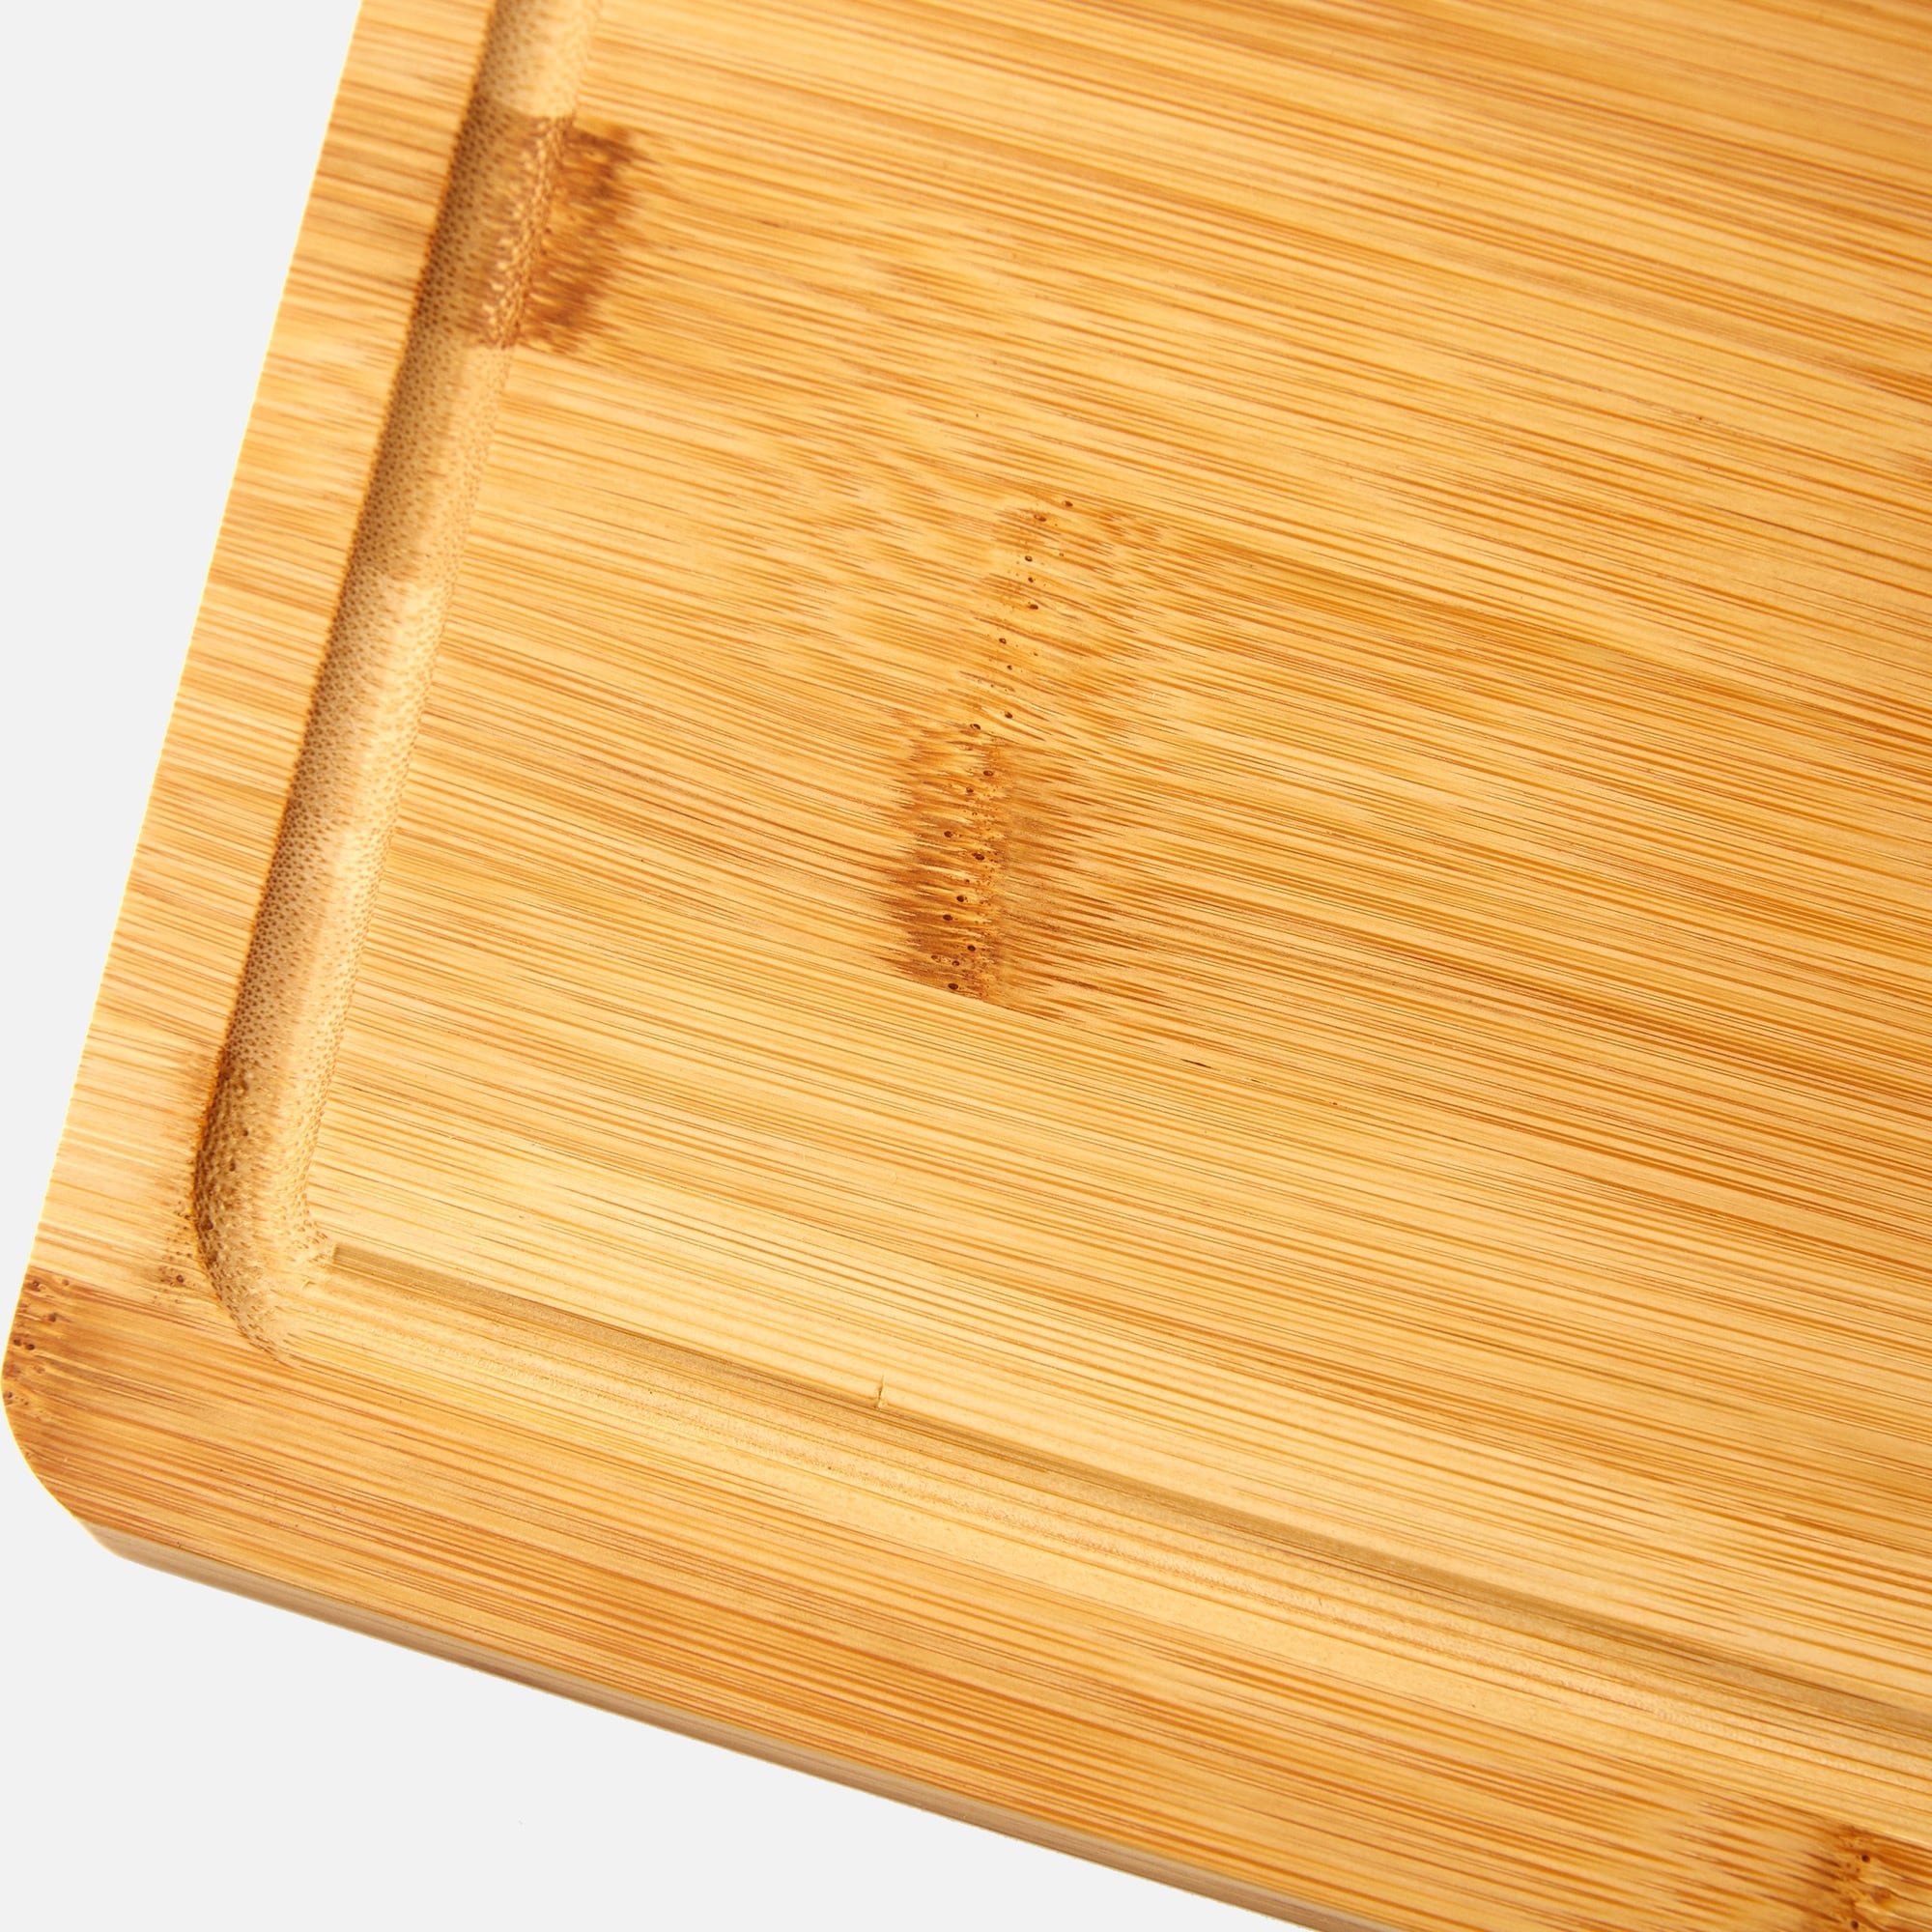 https://ak1.ostkcdn.com/images/products/is/images/direct/af686405e2406abcb834ac527fe045fdca993246/Vaiyer-Organic-Bamboo-Cutting-Board-w--Juice-Groove%2C-Heavy-Duty-Kitchen-Chopping-Board-for-Meat%2C-Chicken%2C-Cheese-and-Vegetables.jpg